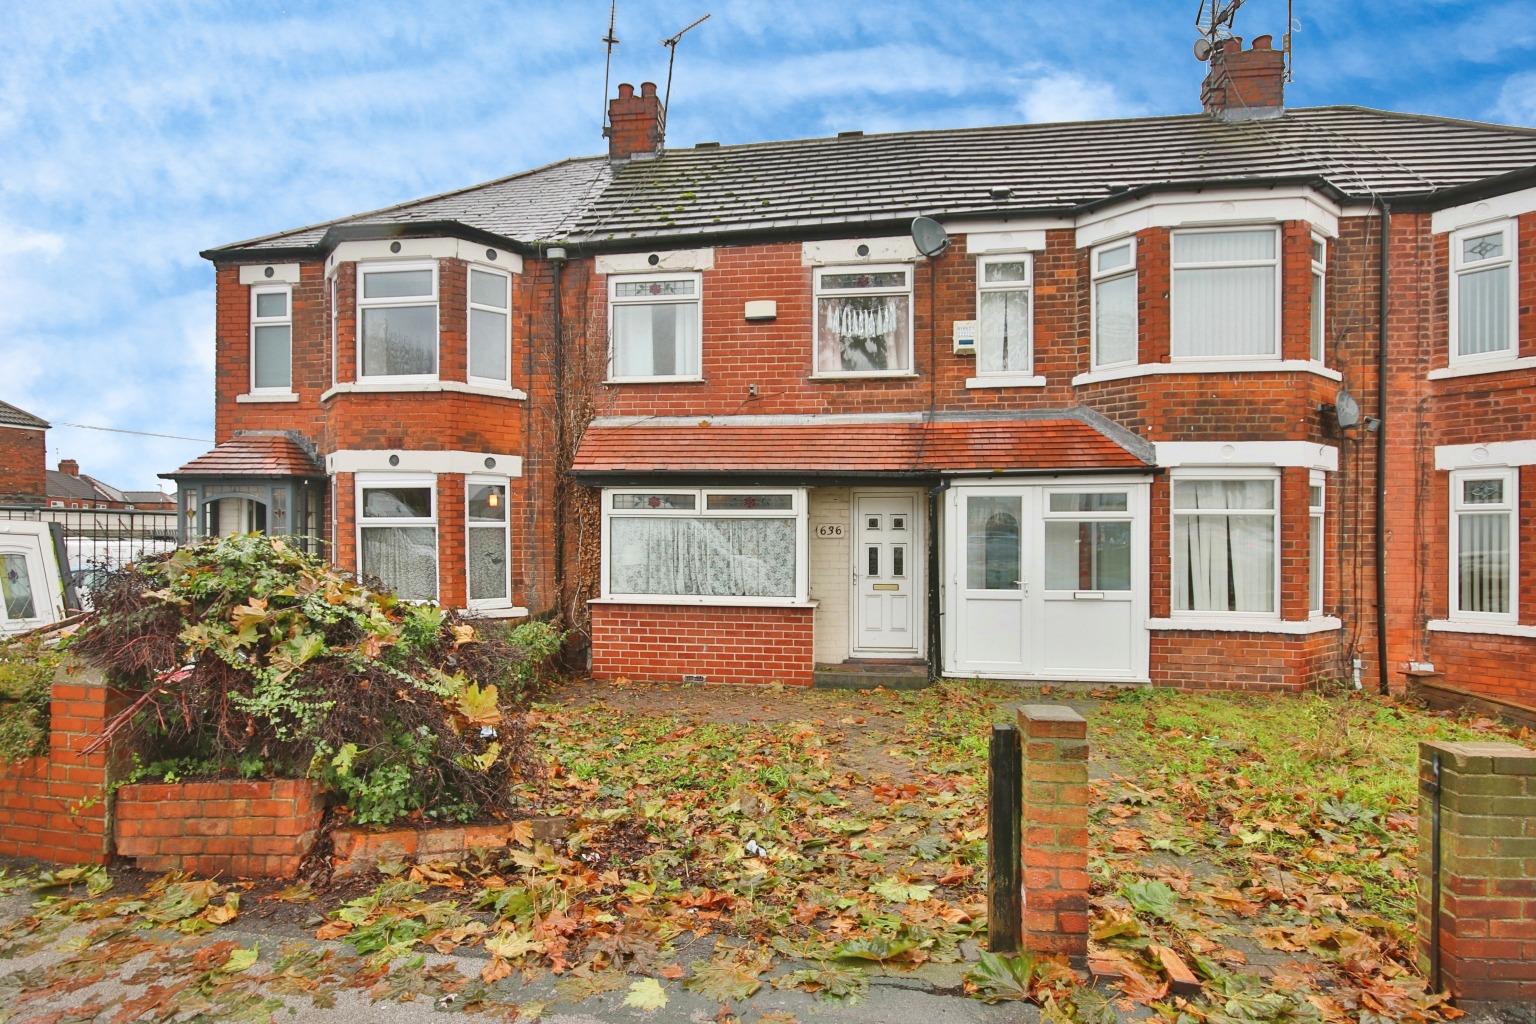 3 bed terraced house for sale in Anlaby Road, Hull - Property Image 1